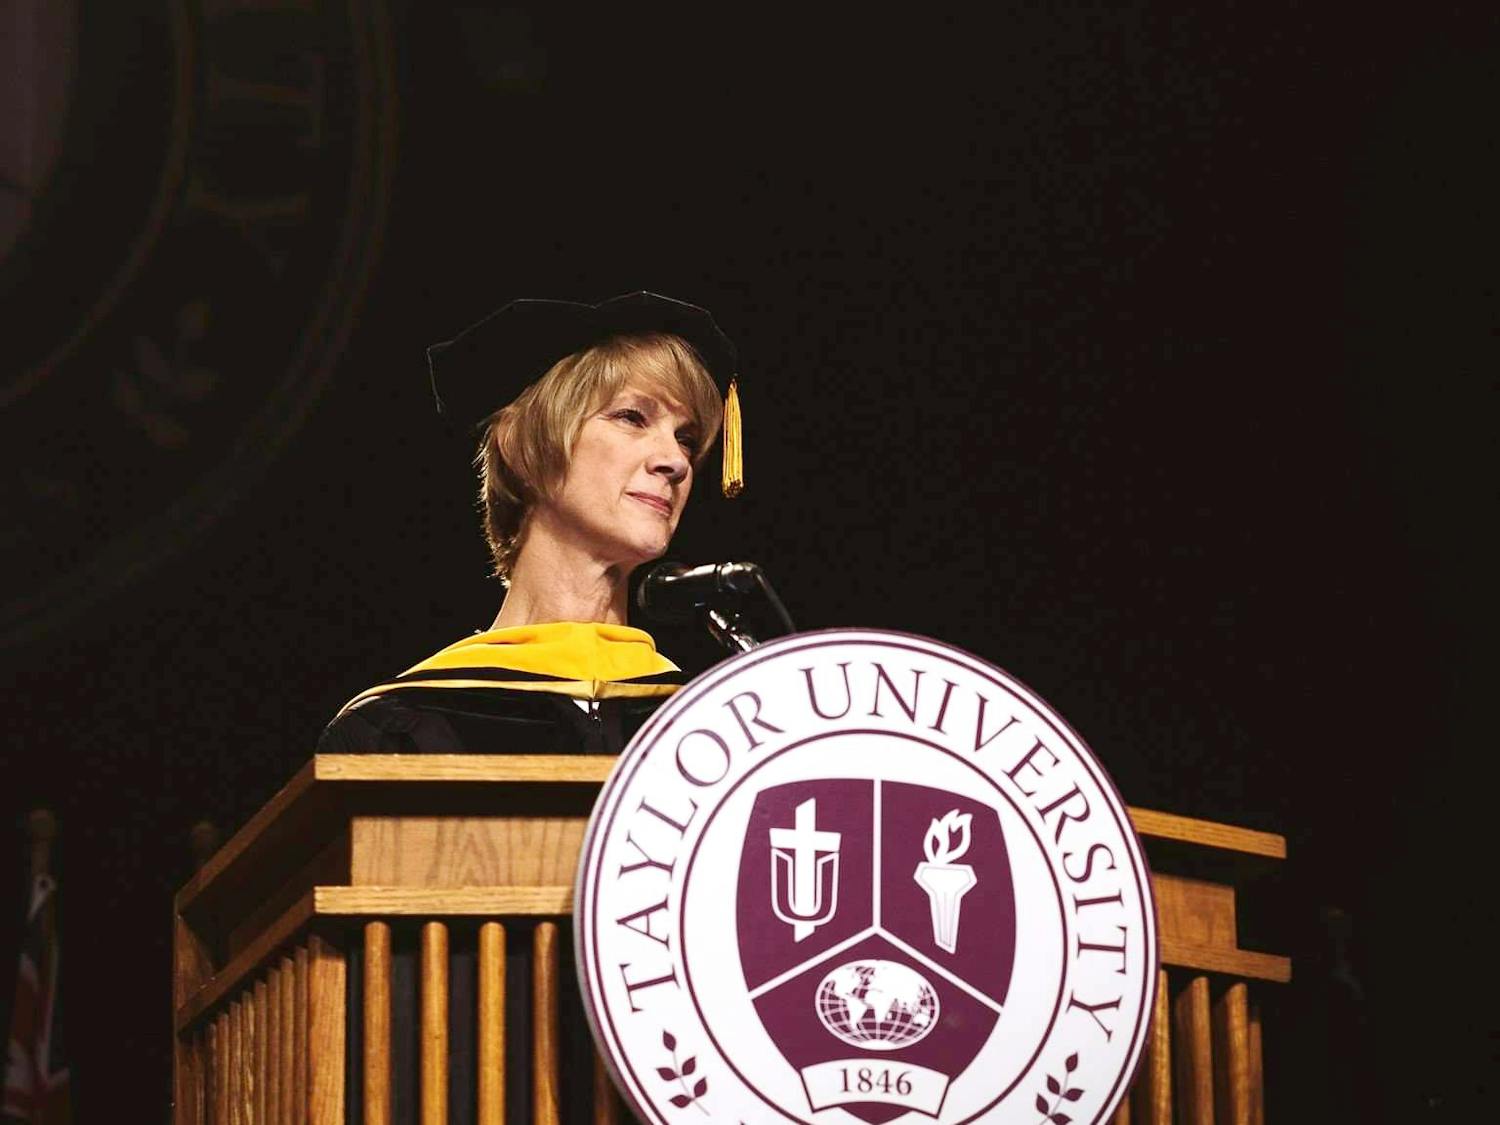 Former Interim President Paige Comstock Cunningham (‘77) will be the commencement address speaker